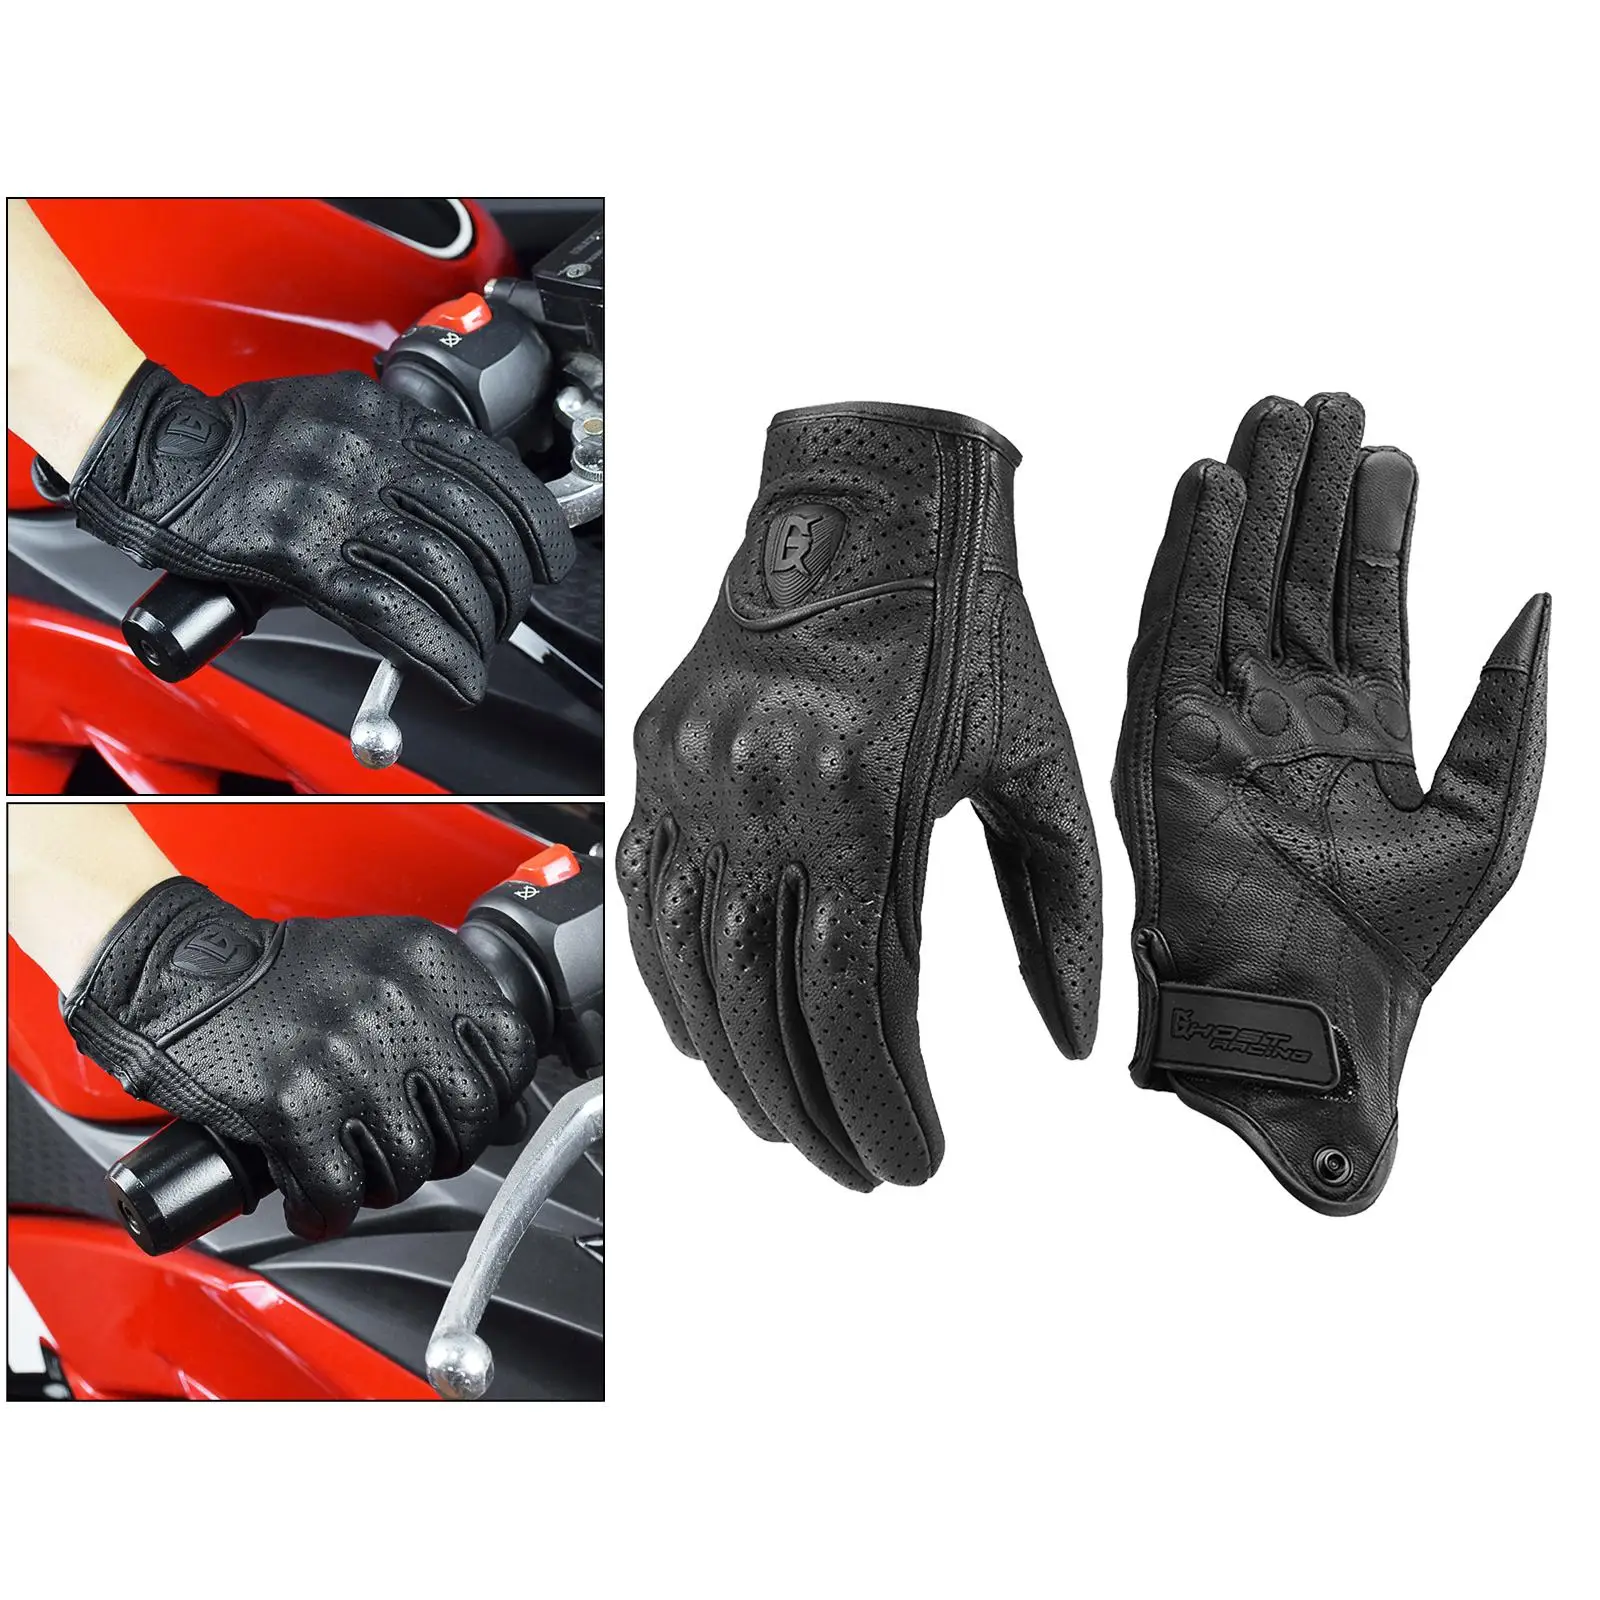 Quality Goatskin Leather Motorcycle motor  Gloves Touchscreen for Men and Women Black